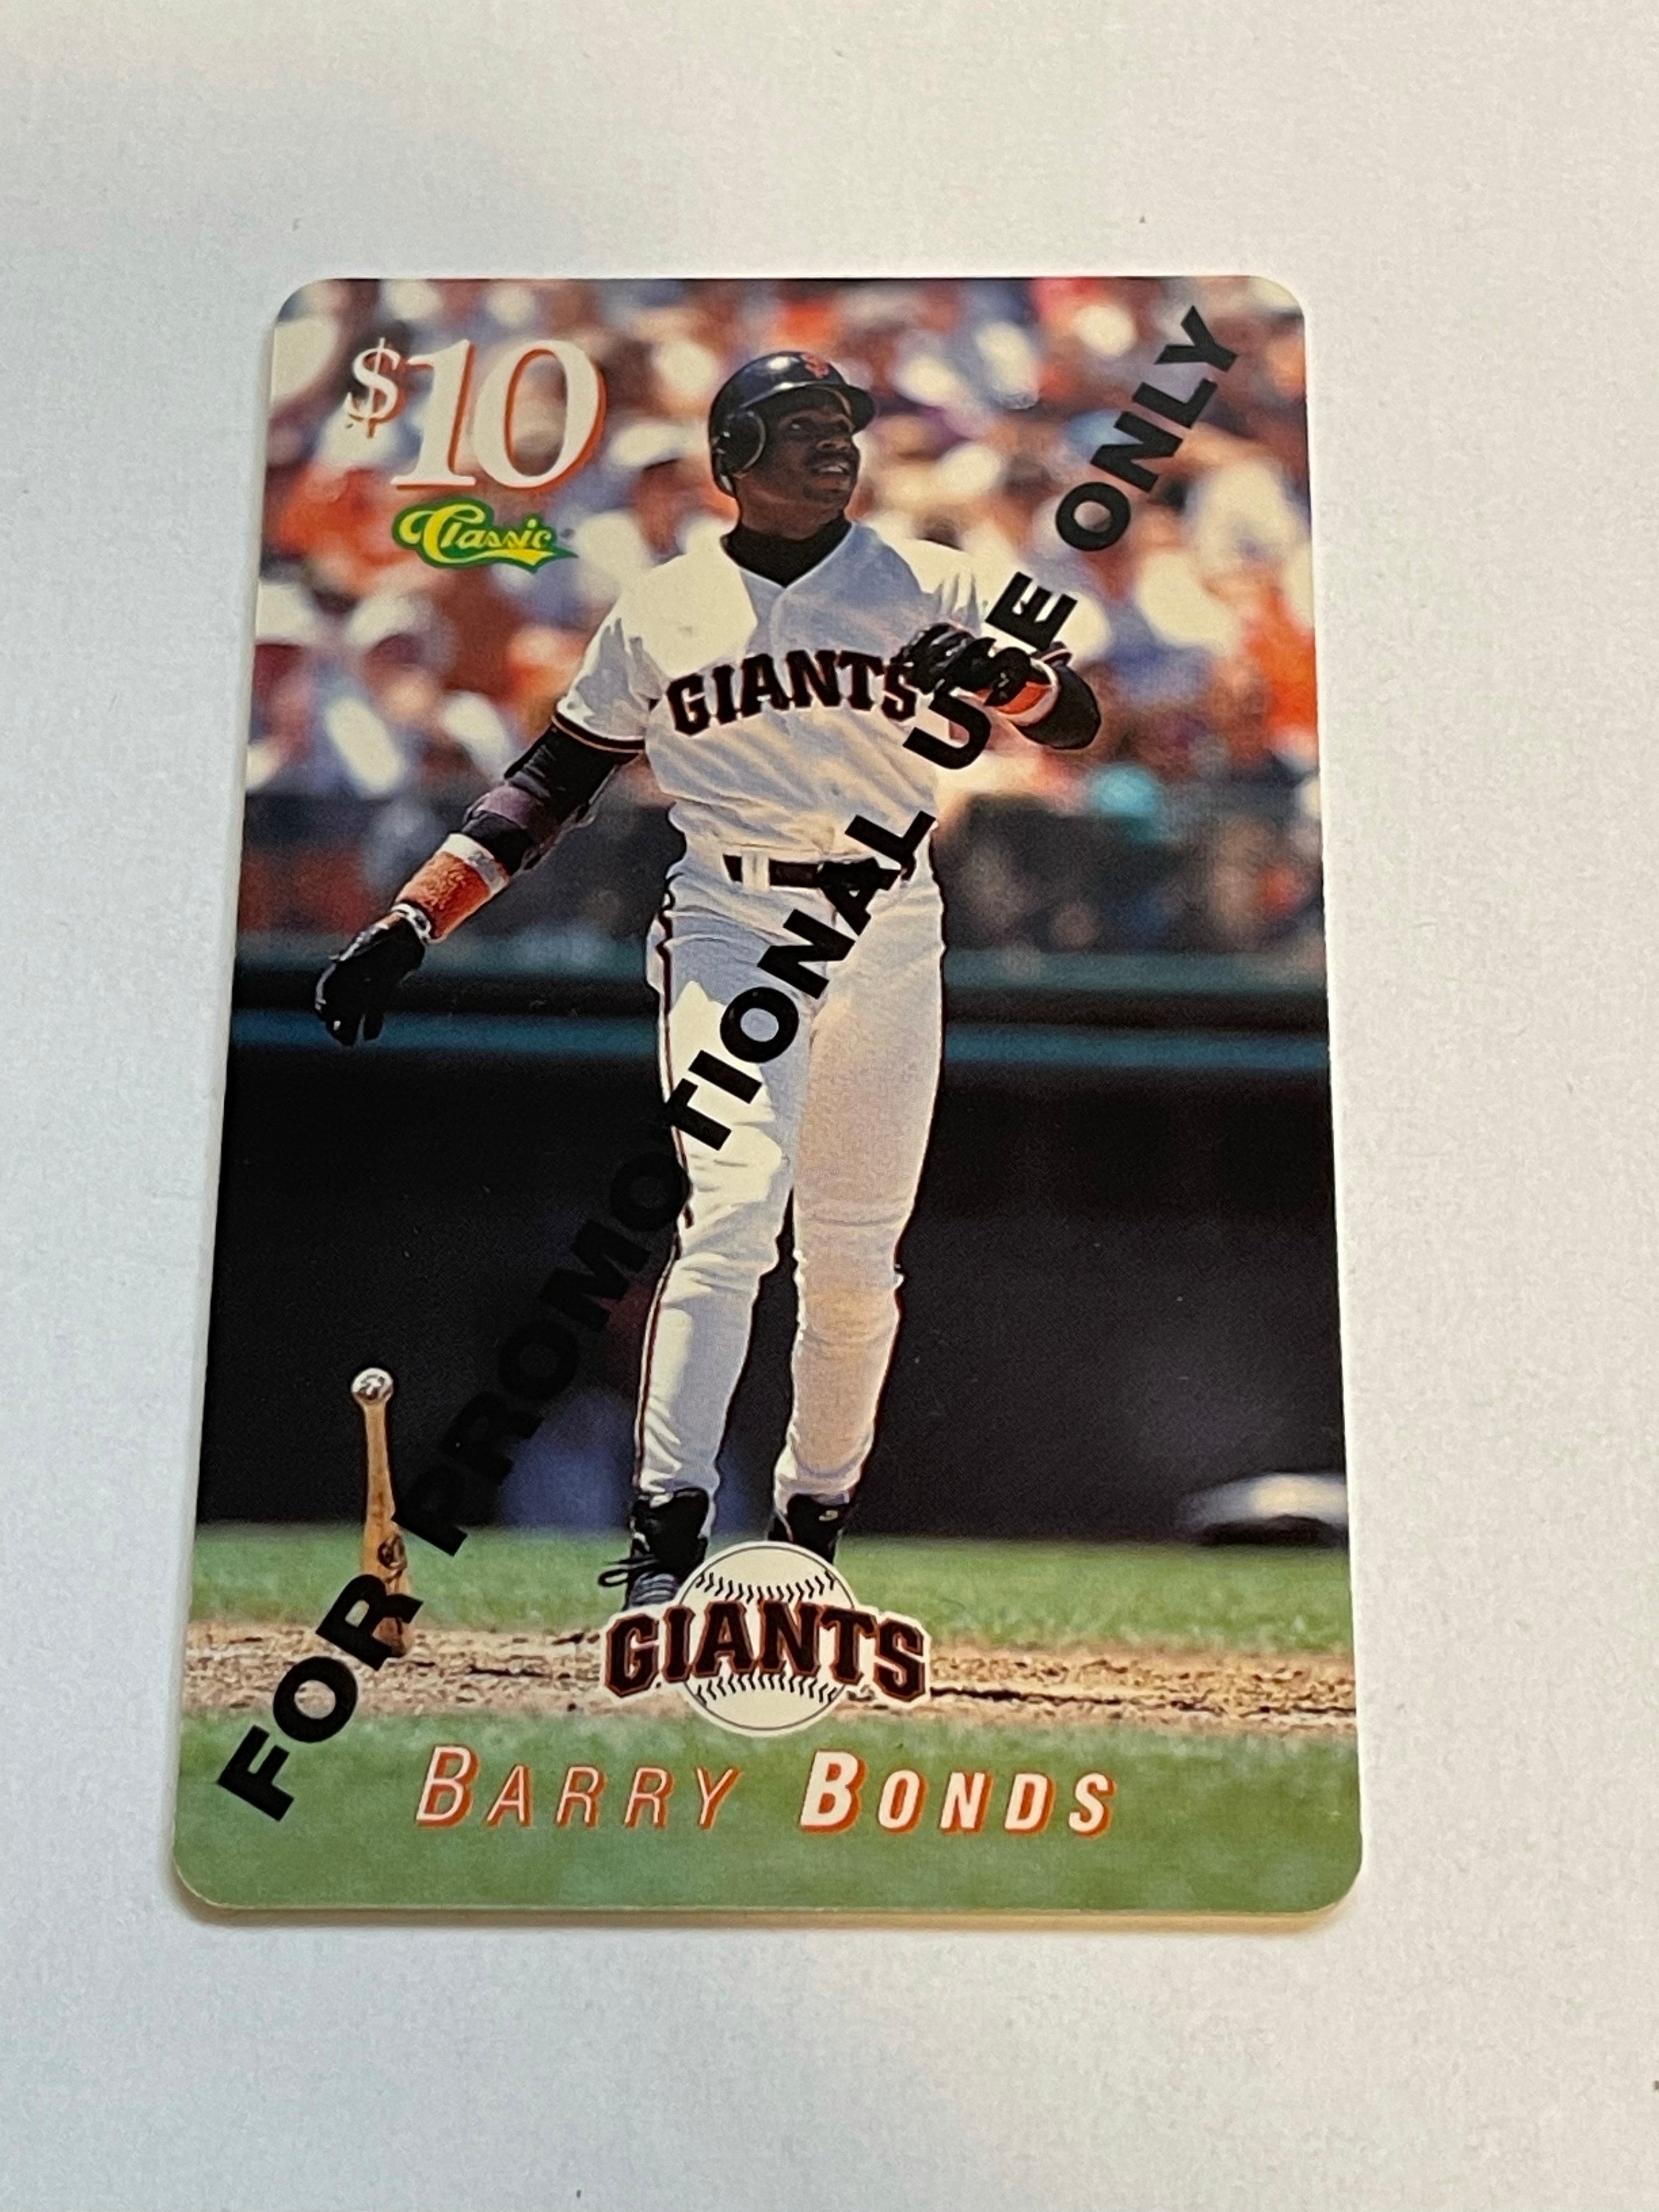 Barry Bonds promotional phone card 1990s